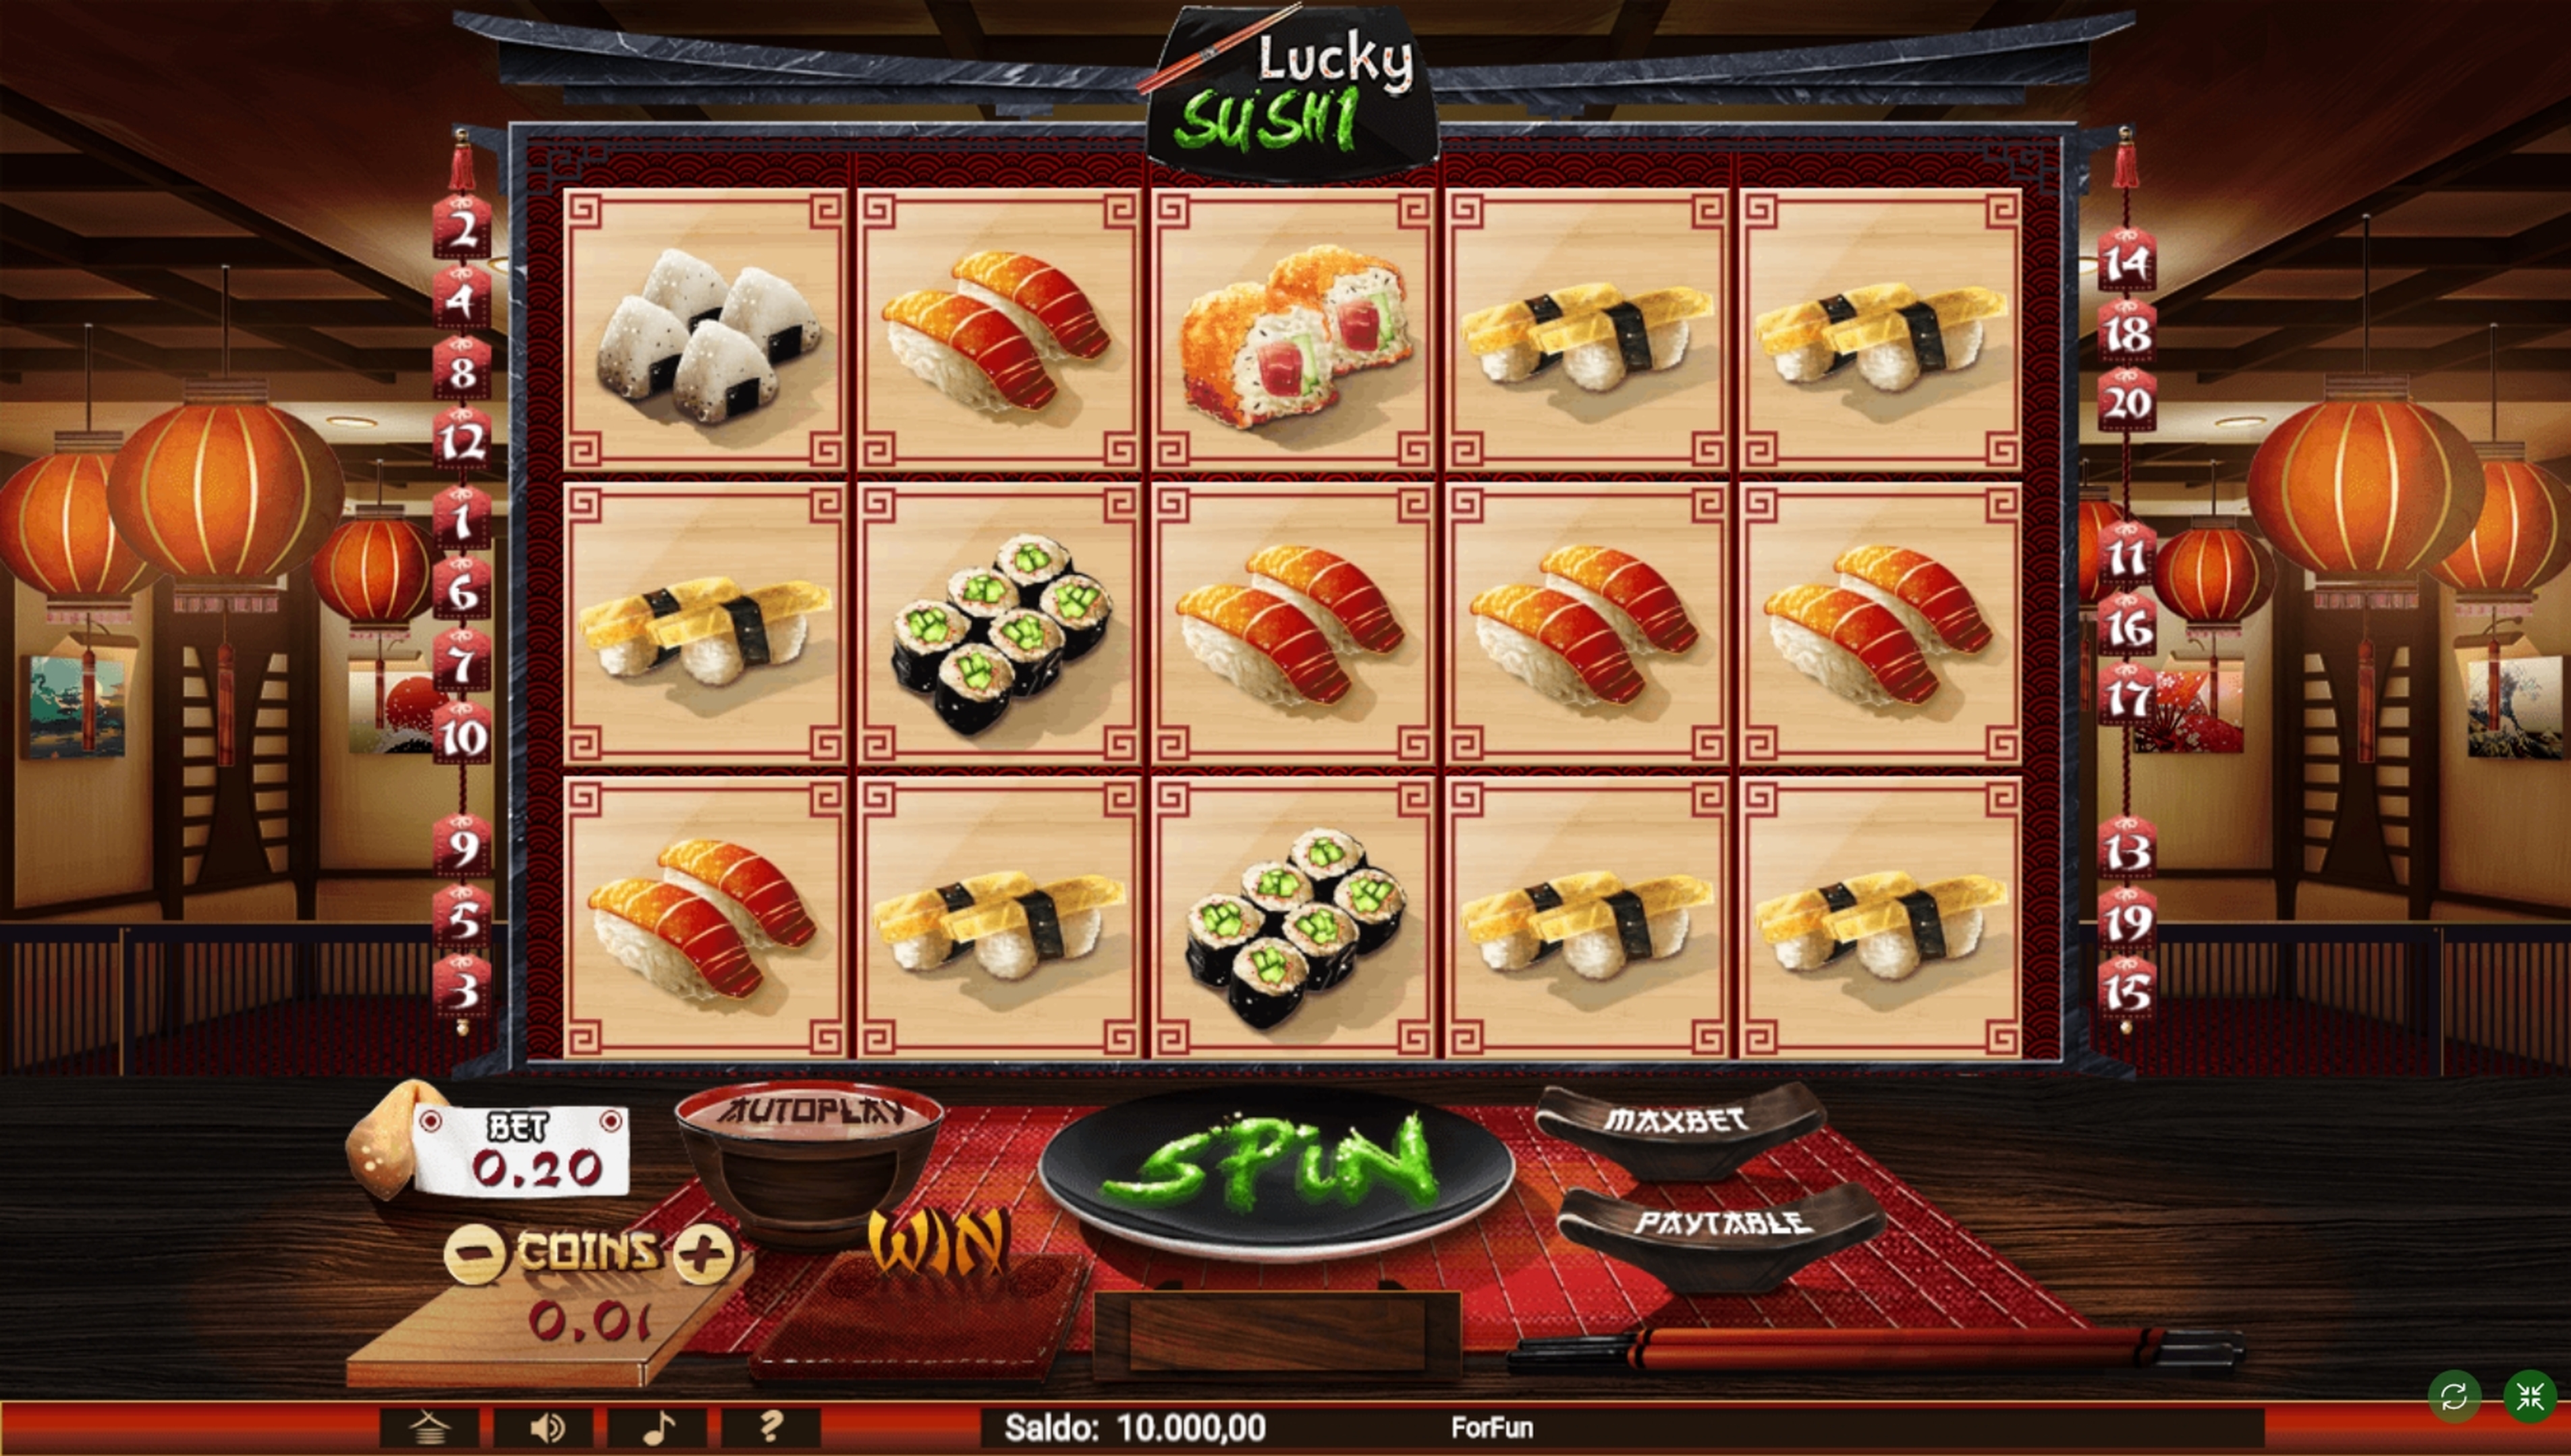 Reels in Lucky Sushi Slot Game by Tuko Productions